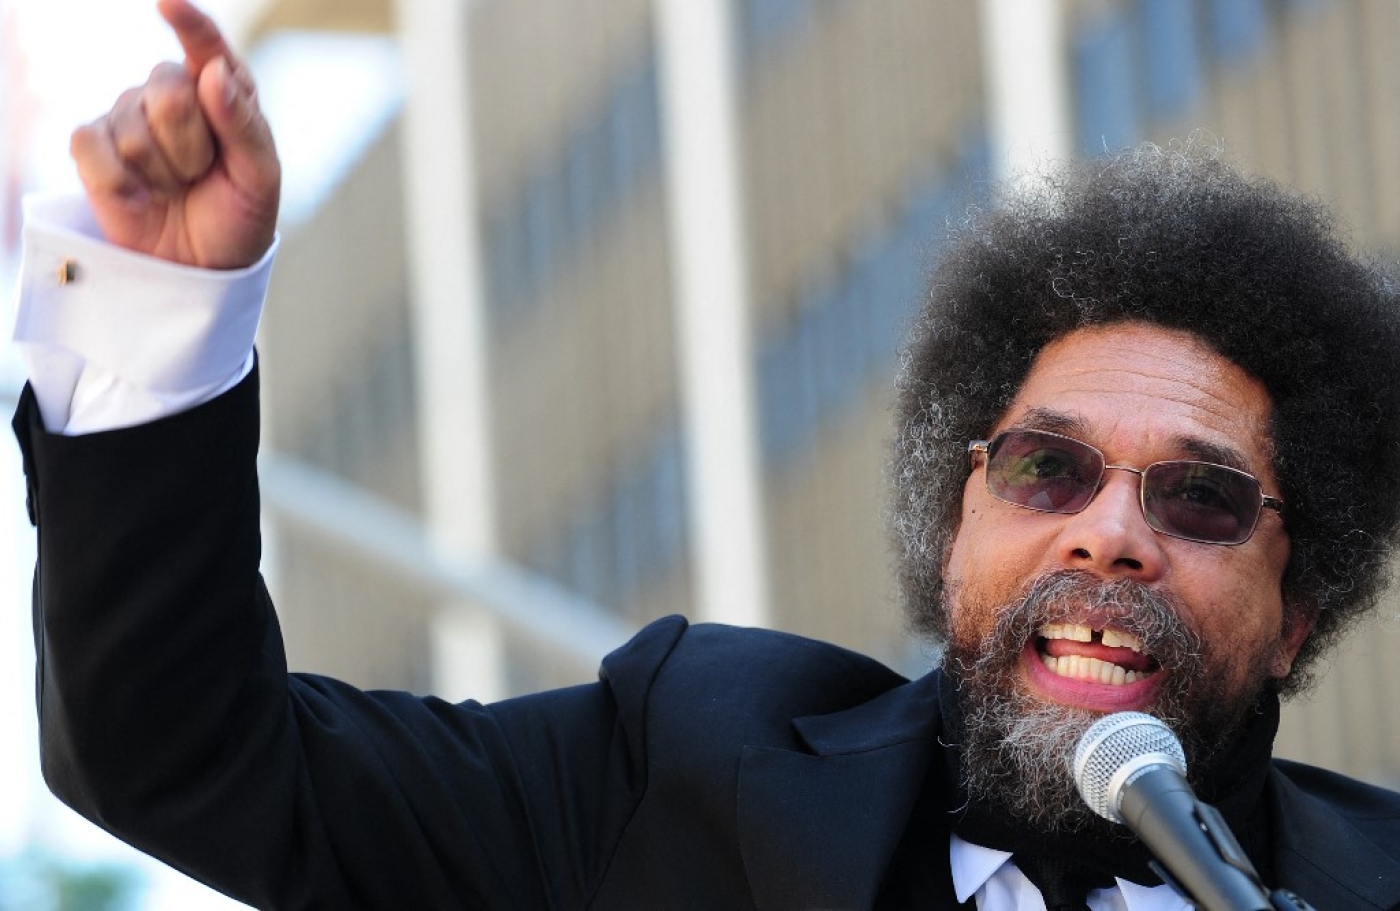 Cornell West finished his PhD at Princeton University in 1980 and was subsequently awarded tenure at Yale and then later at Harvard.